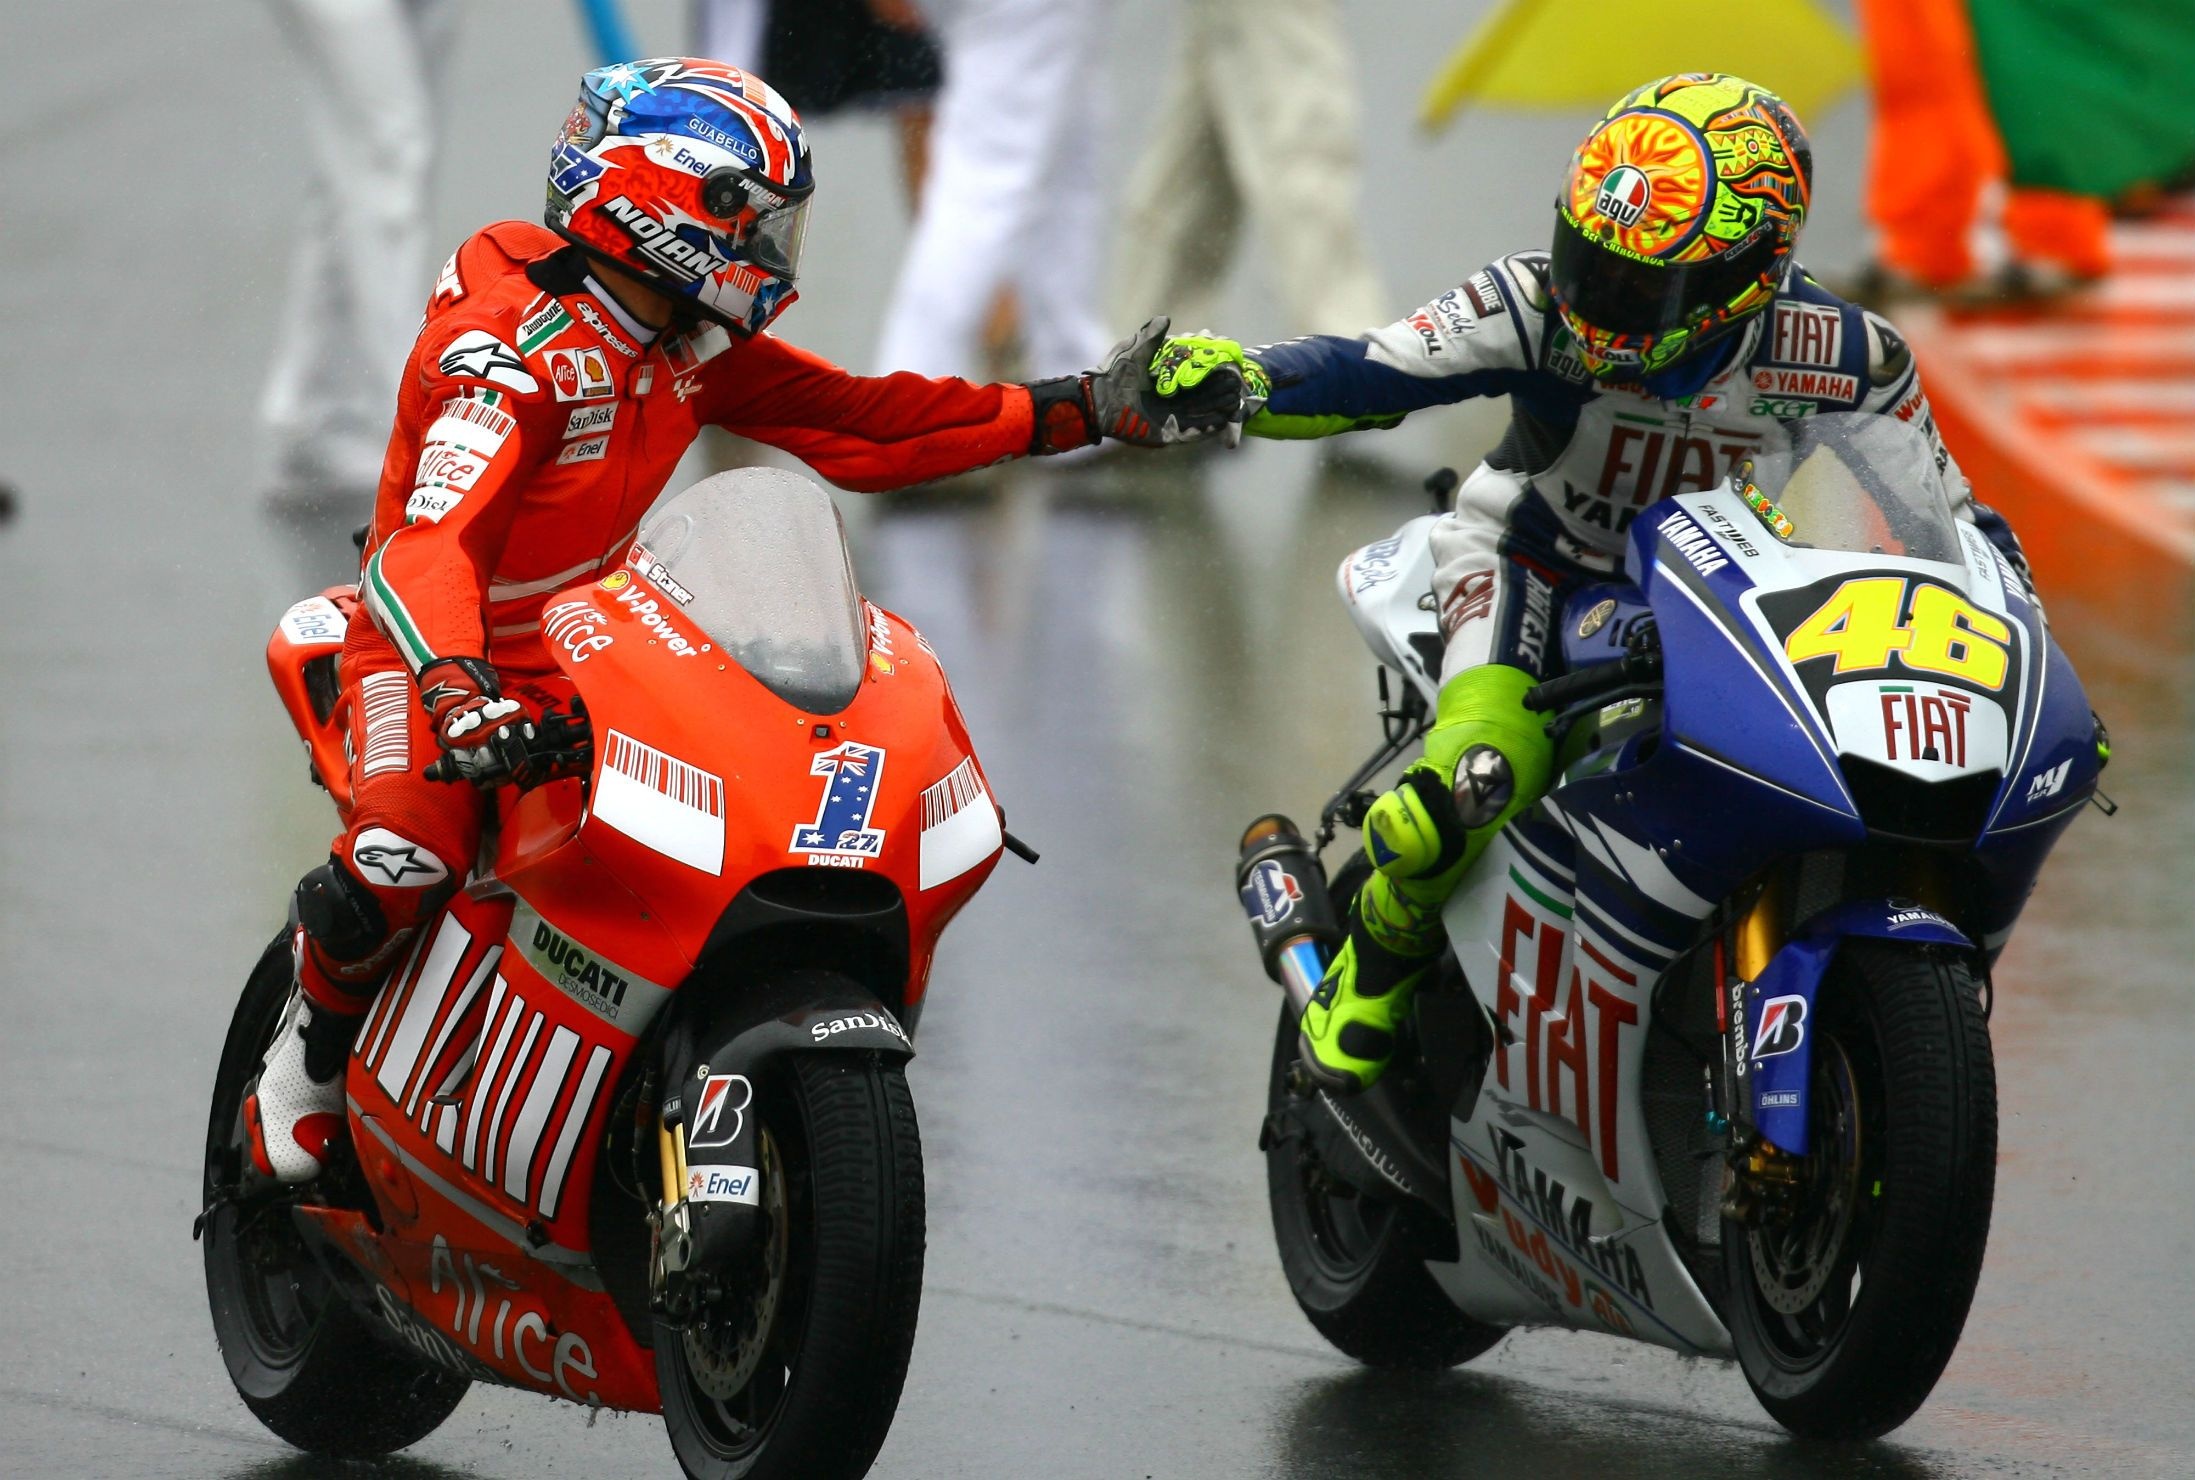 Motorcycle Racing: Rossi vs Casey Stoner, The Doctor, Ducati and Yamaha, 2012. 2200x1480 HD Wallpaper.